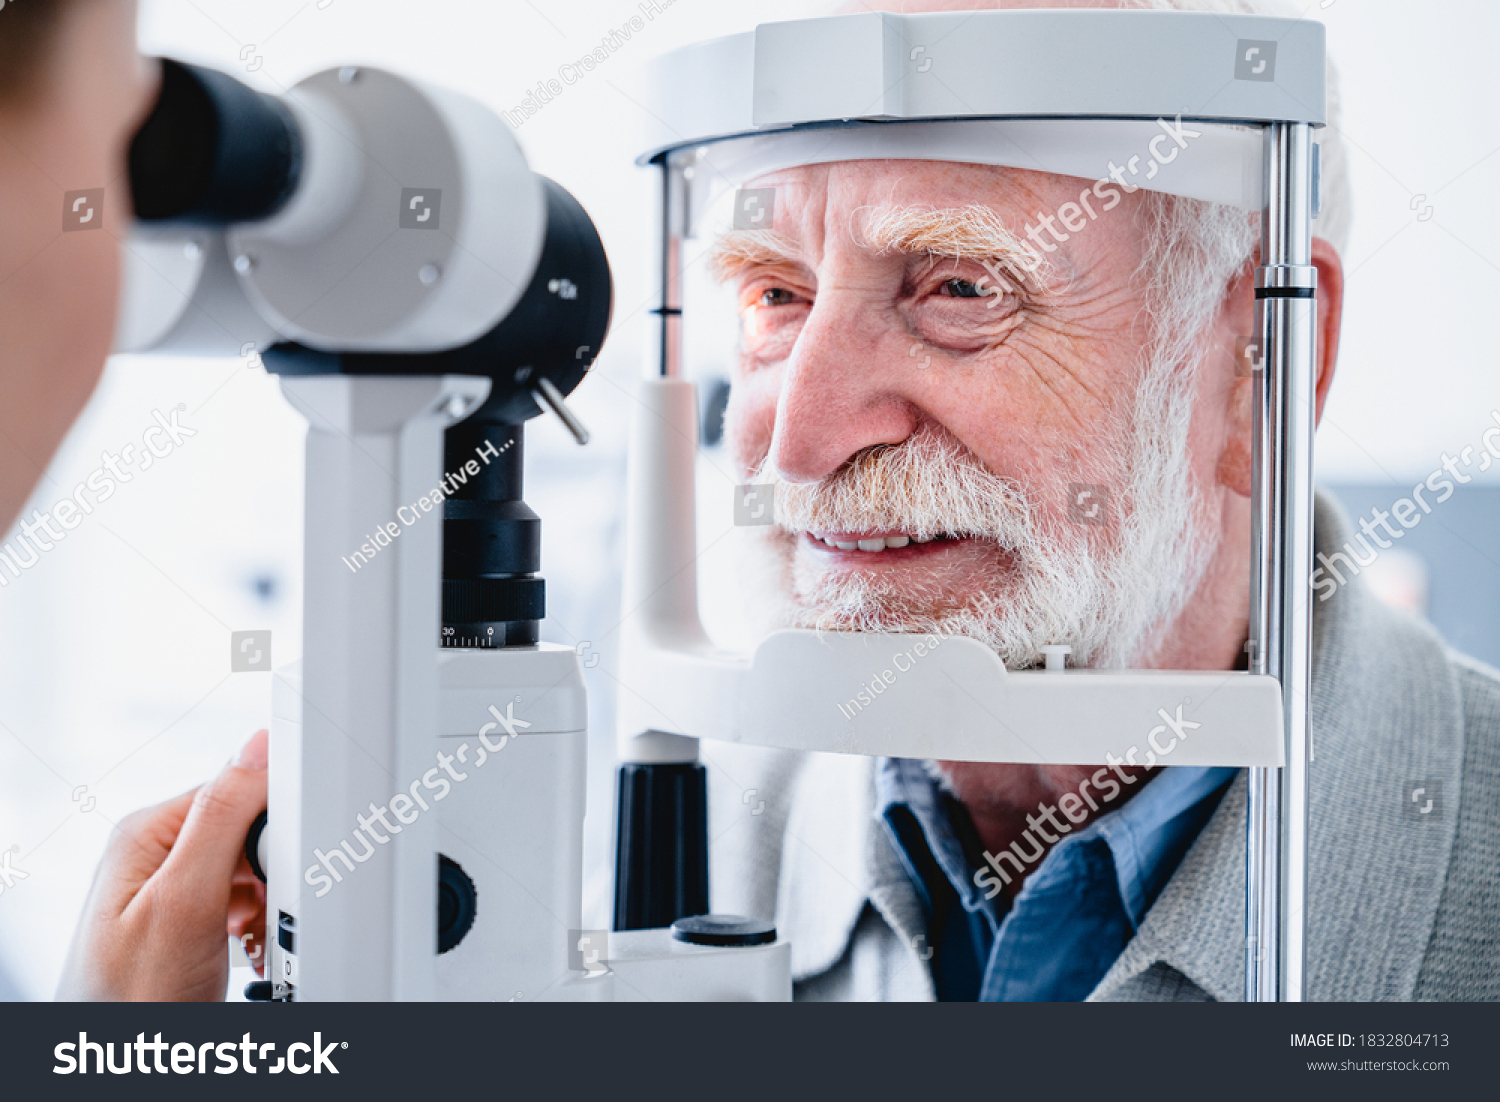 Close up photo of smiling senior male patient during sight examination #1832804713